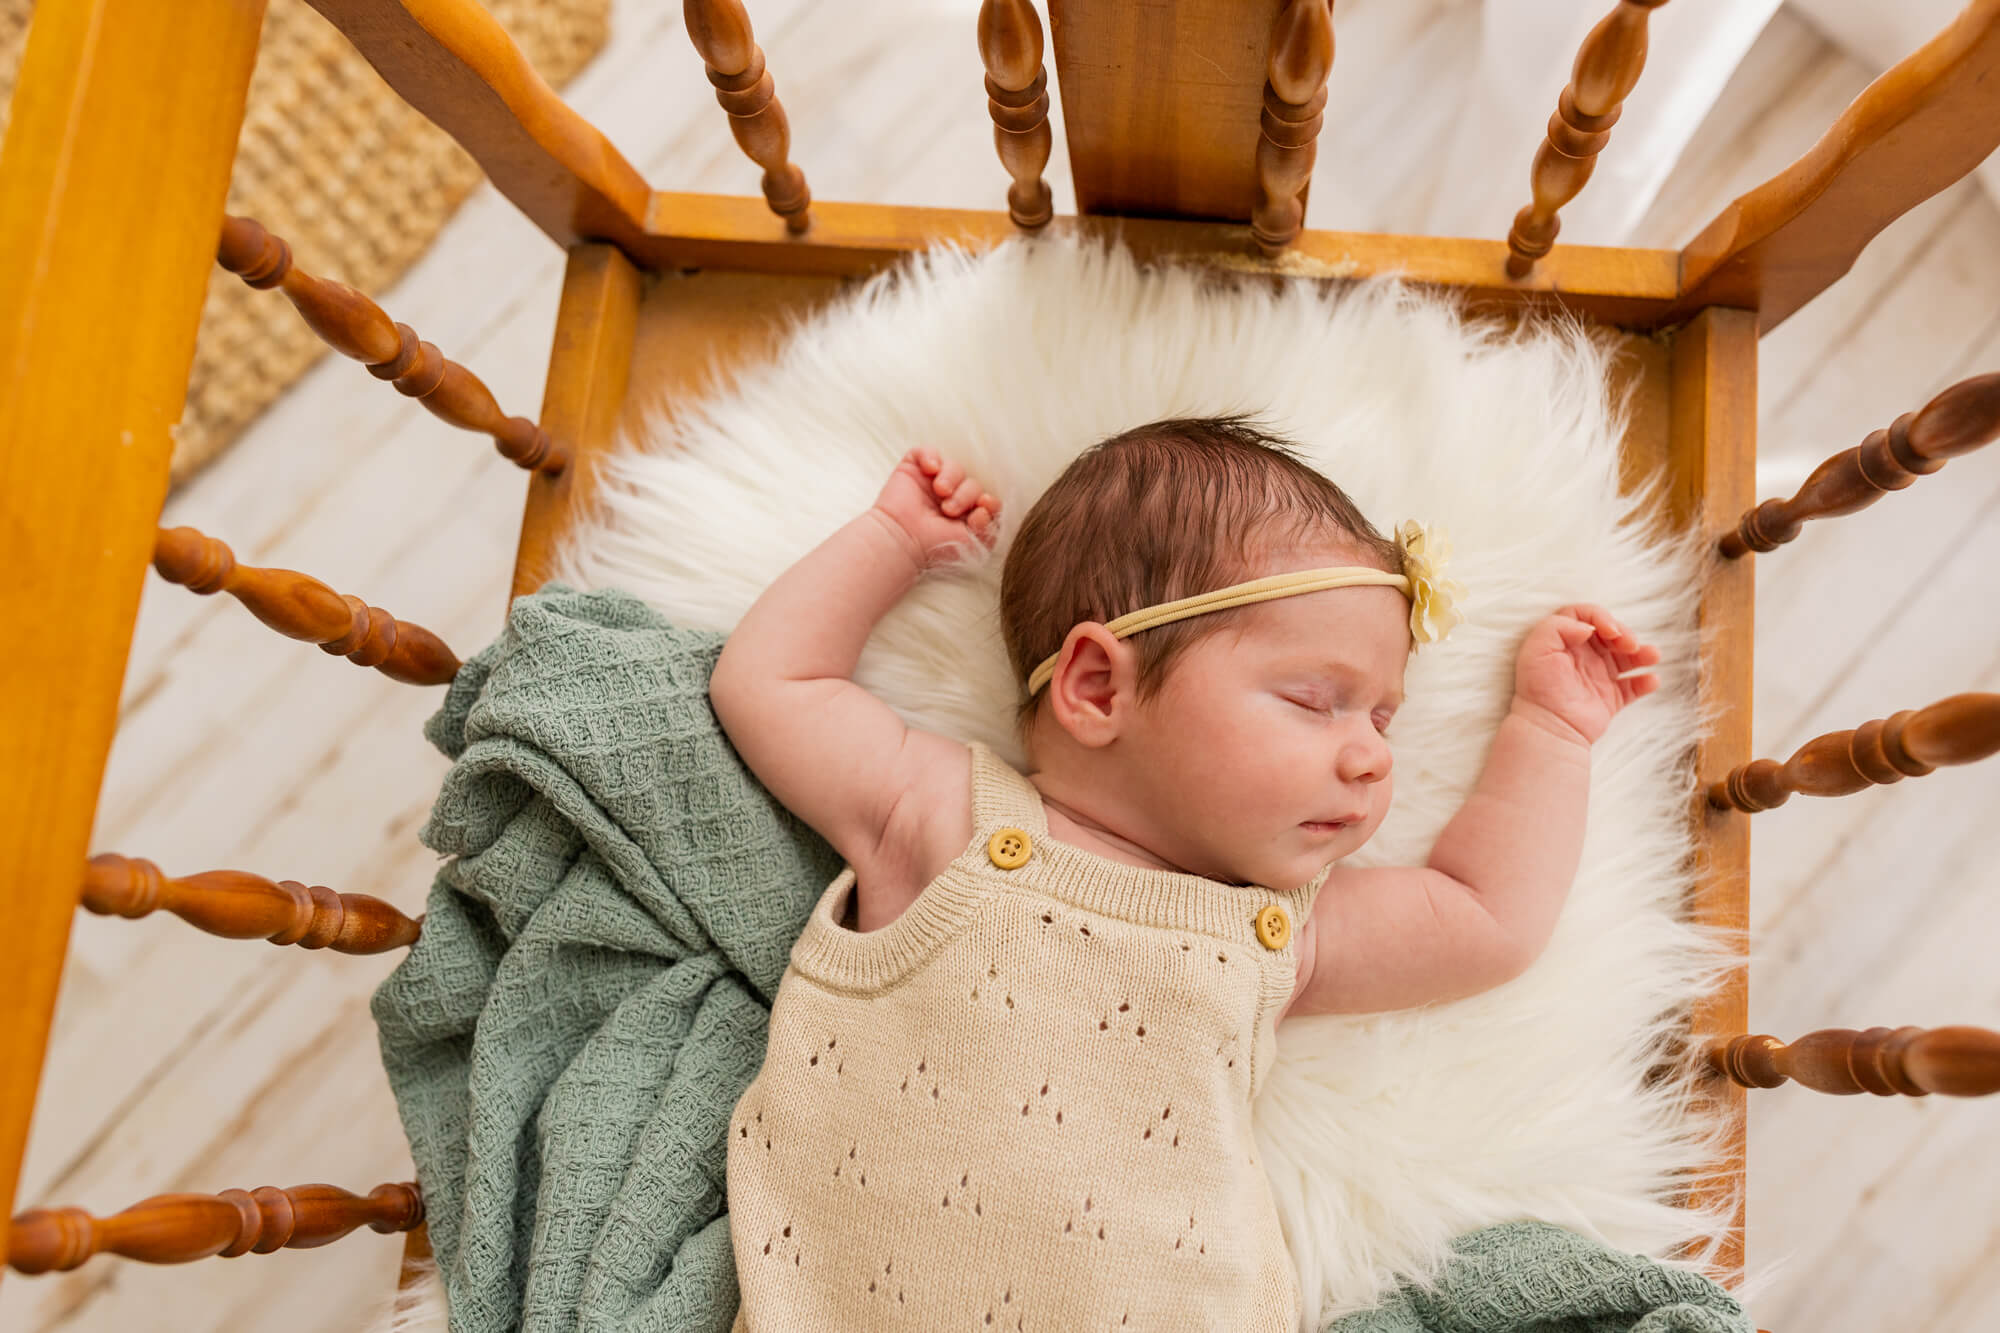 newborn baby girl in cream onesie and headband sleeping with arms up